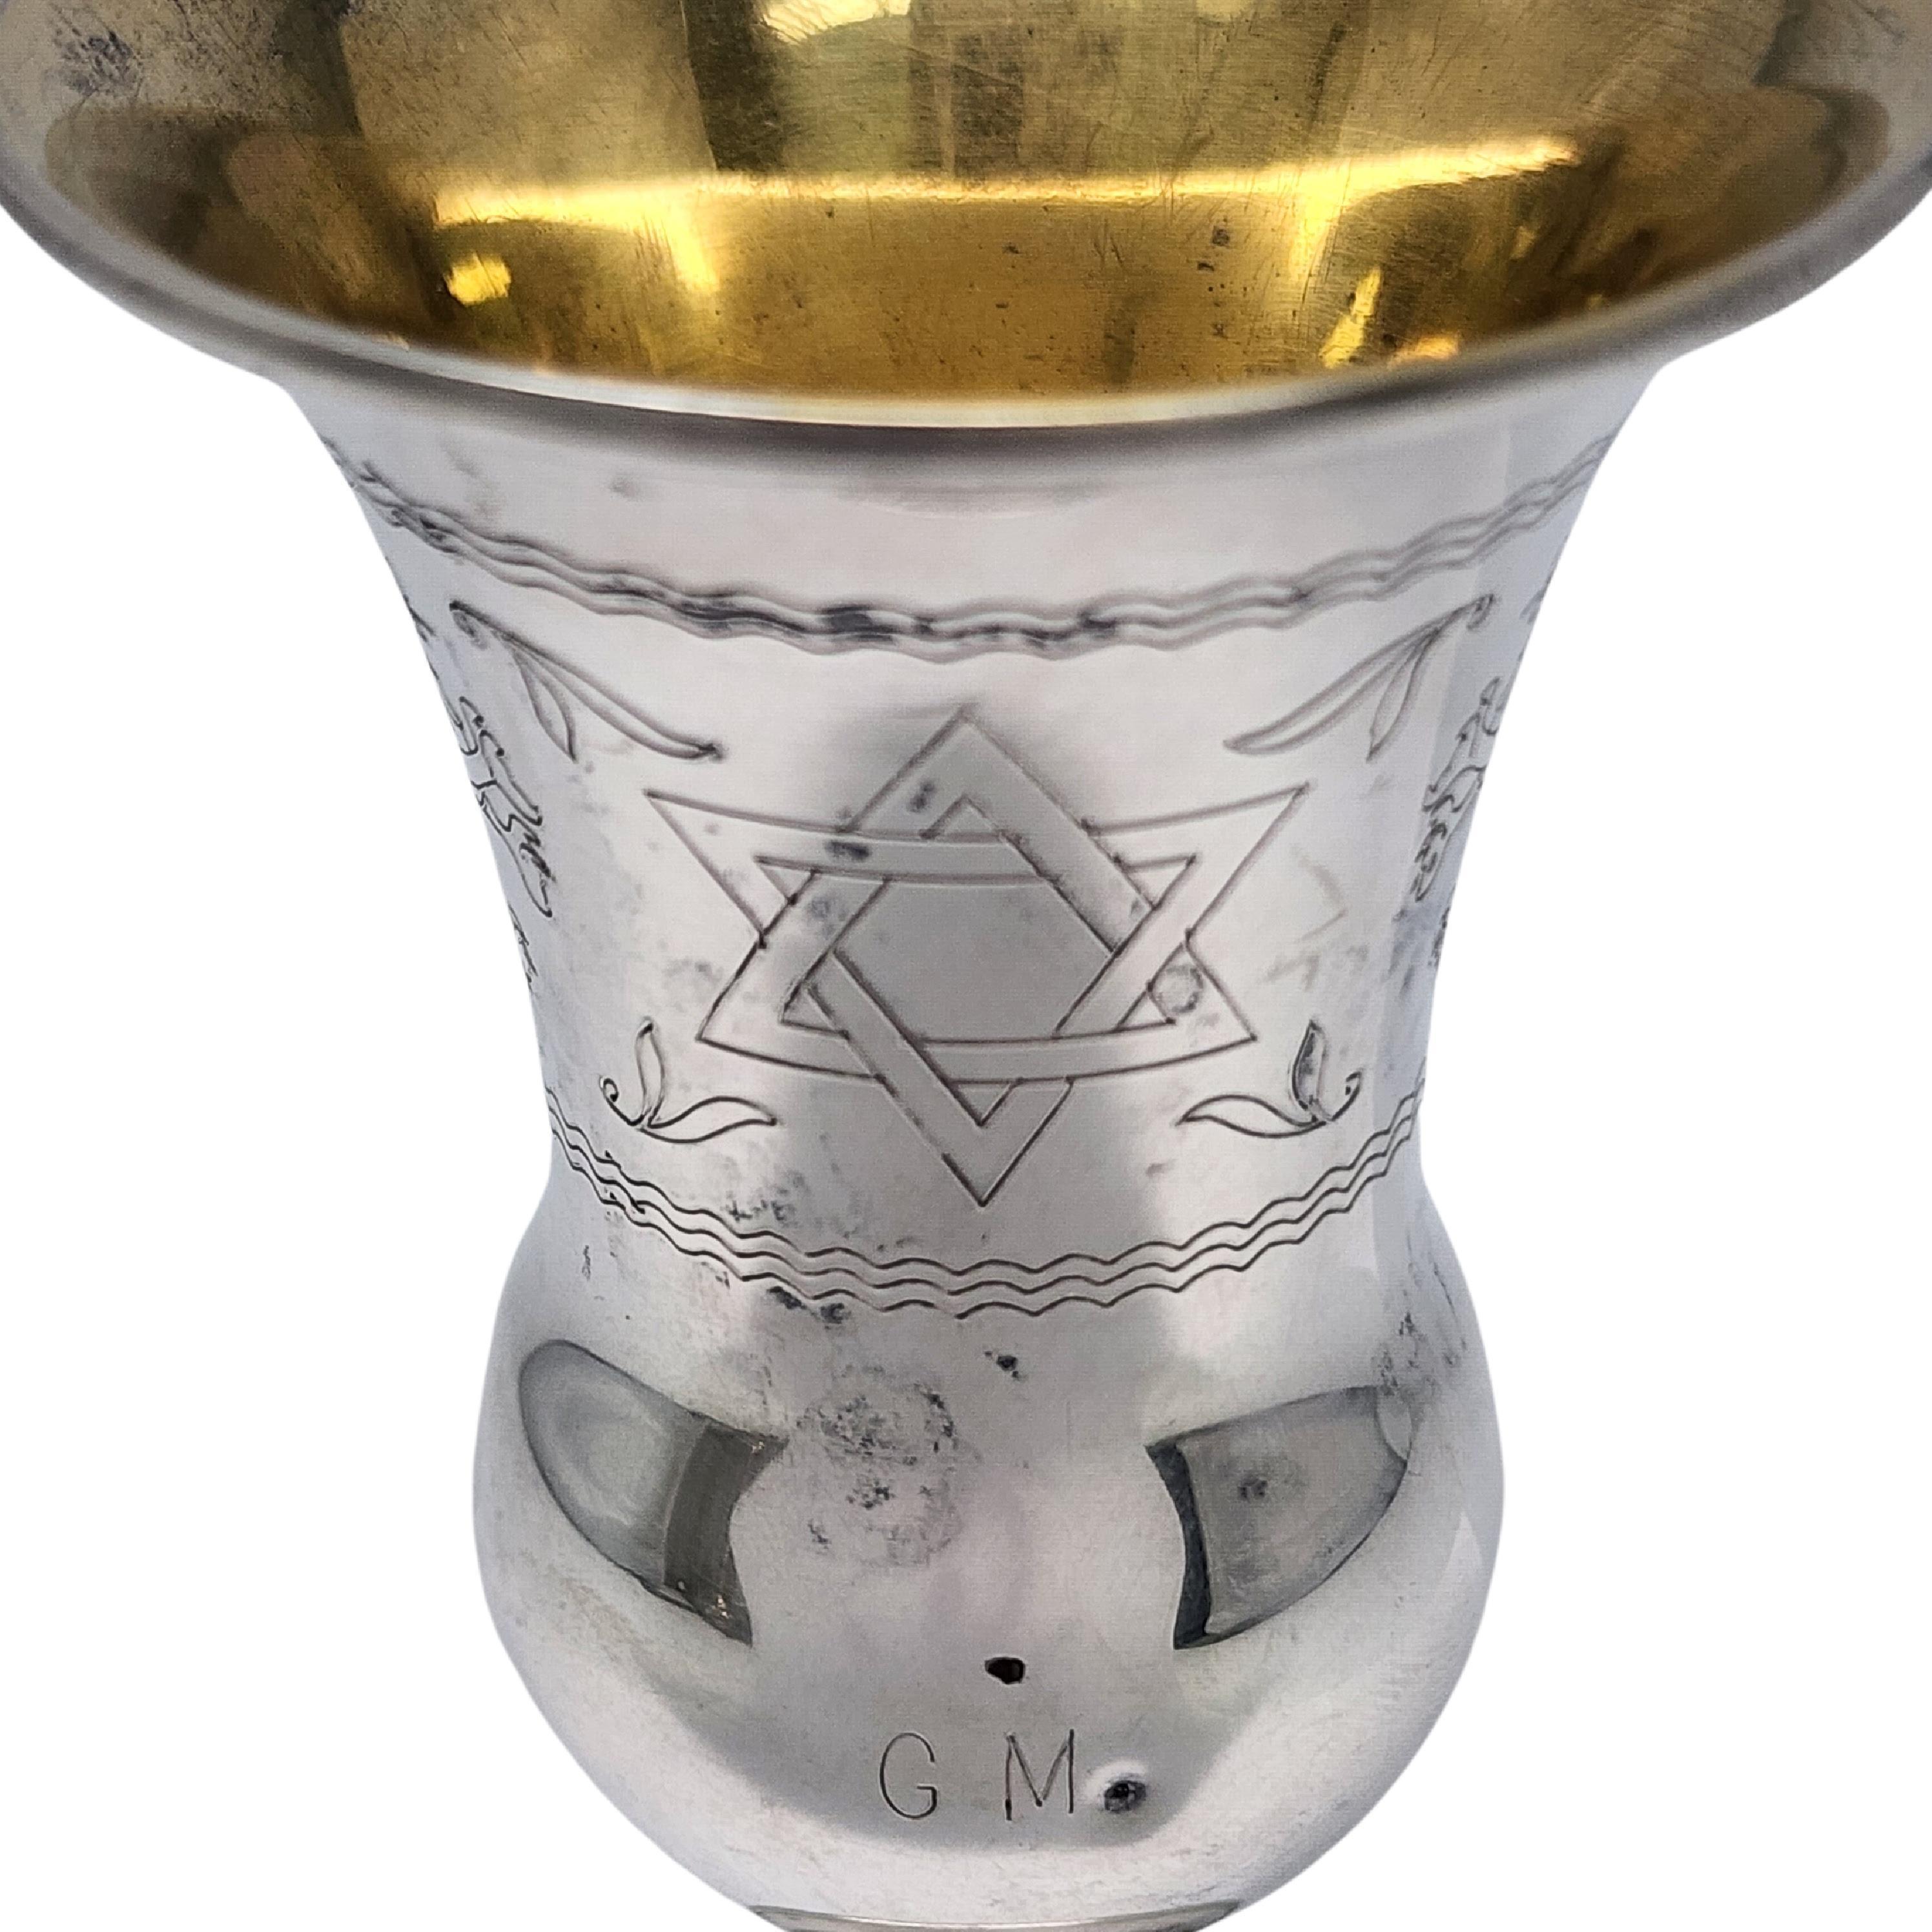 Web Sterling Silver Gold Wash Interior Kiddush Cup with Monogram #16813 For Sale 3